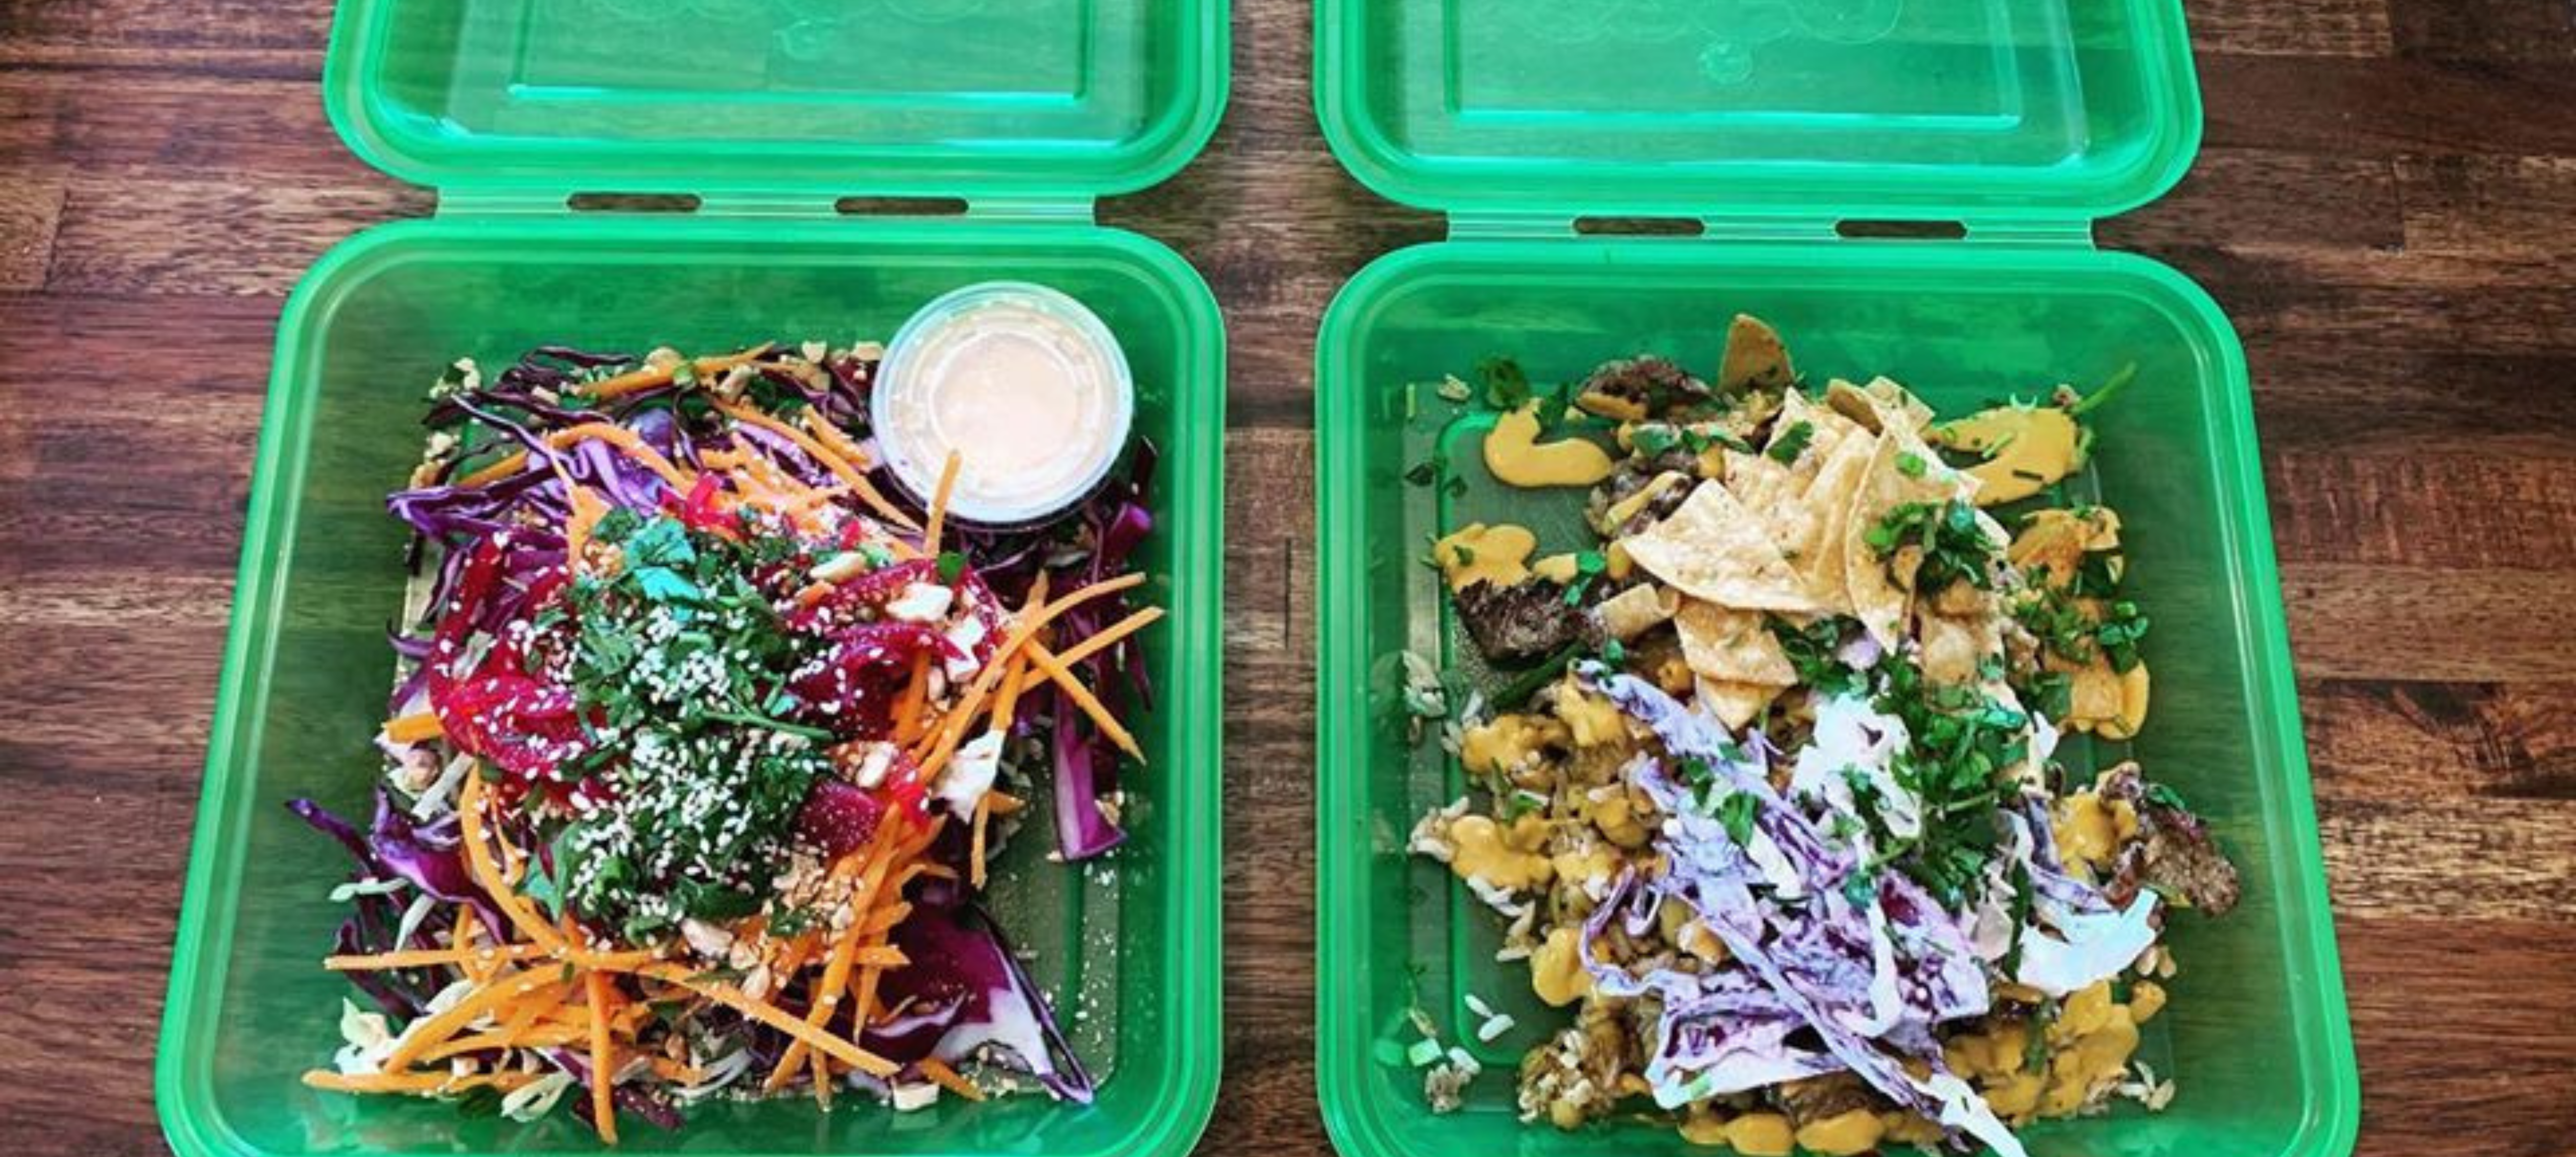 Use a Reusable Green Box Takeout Container! image